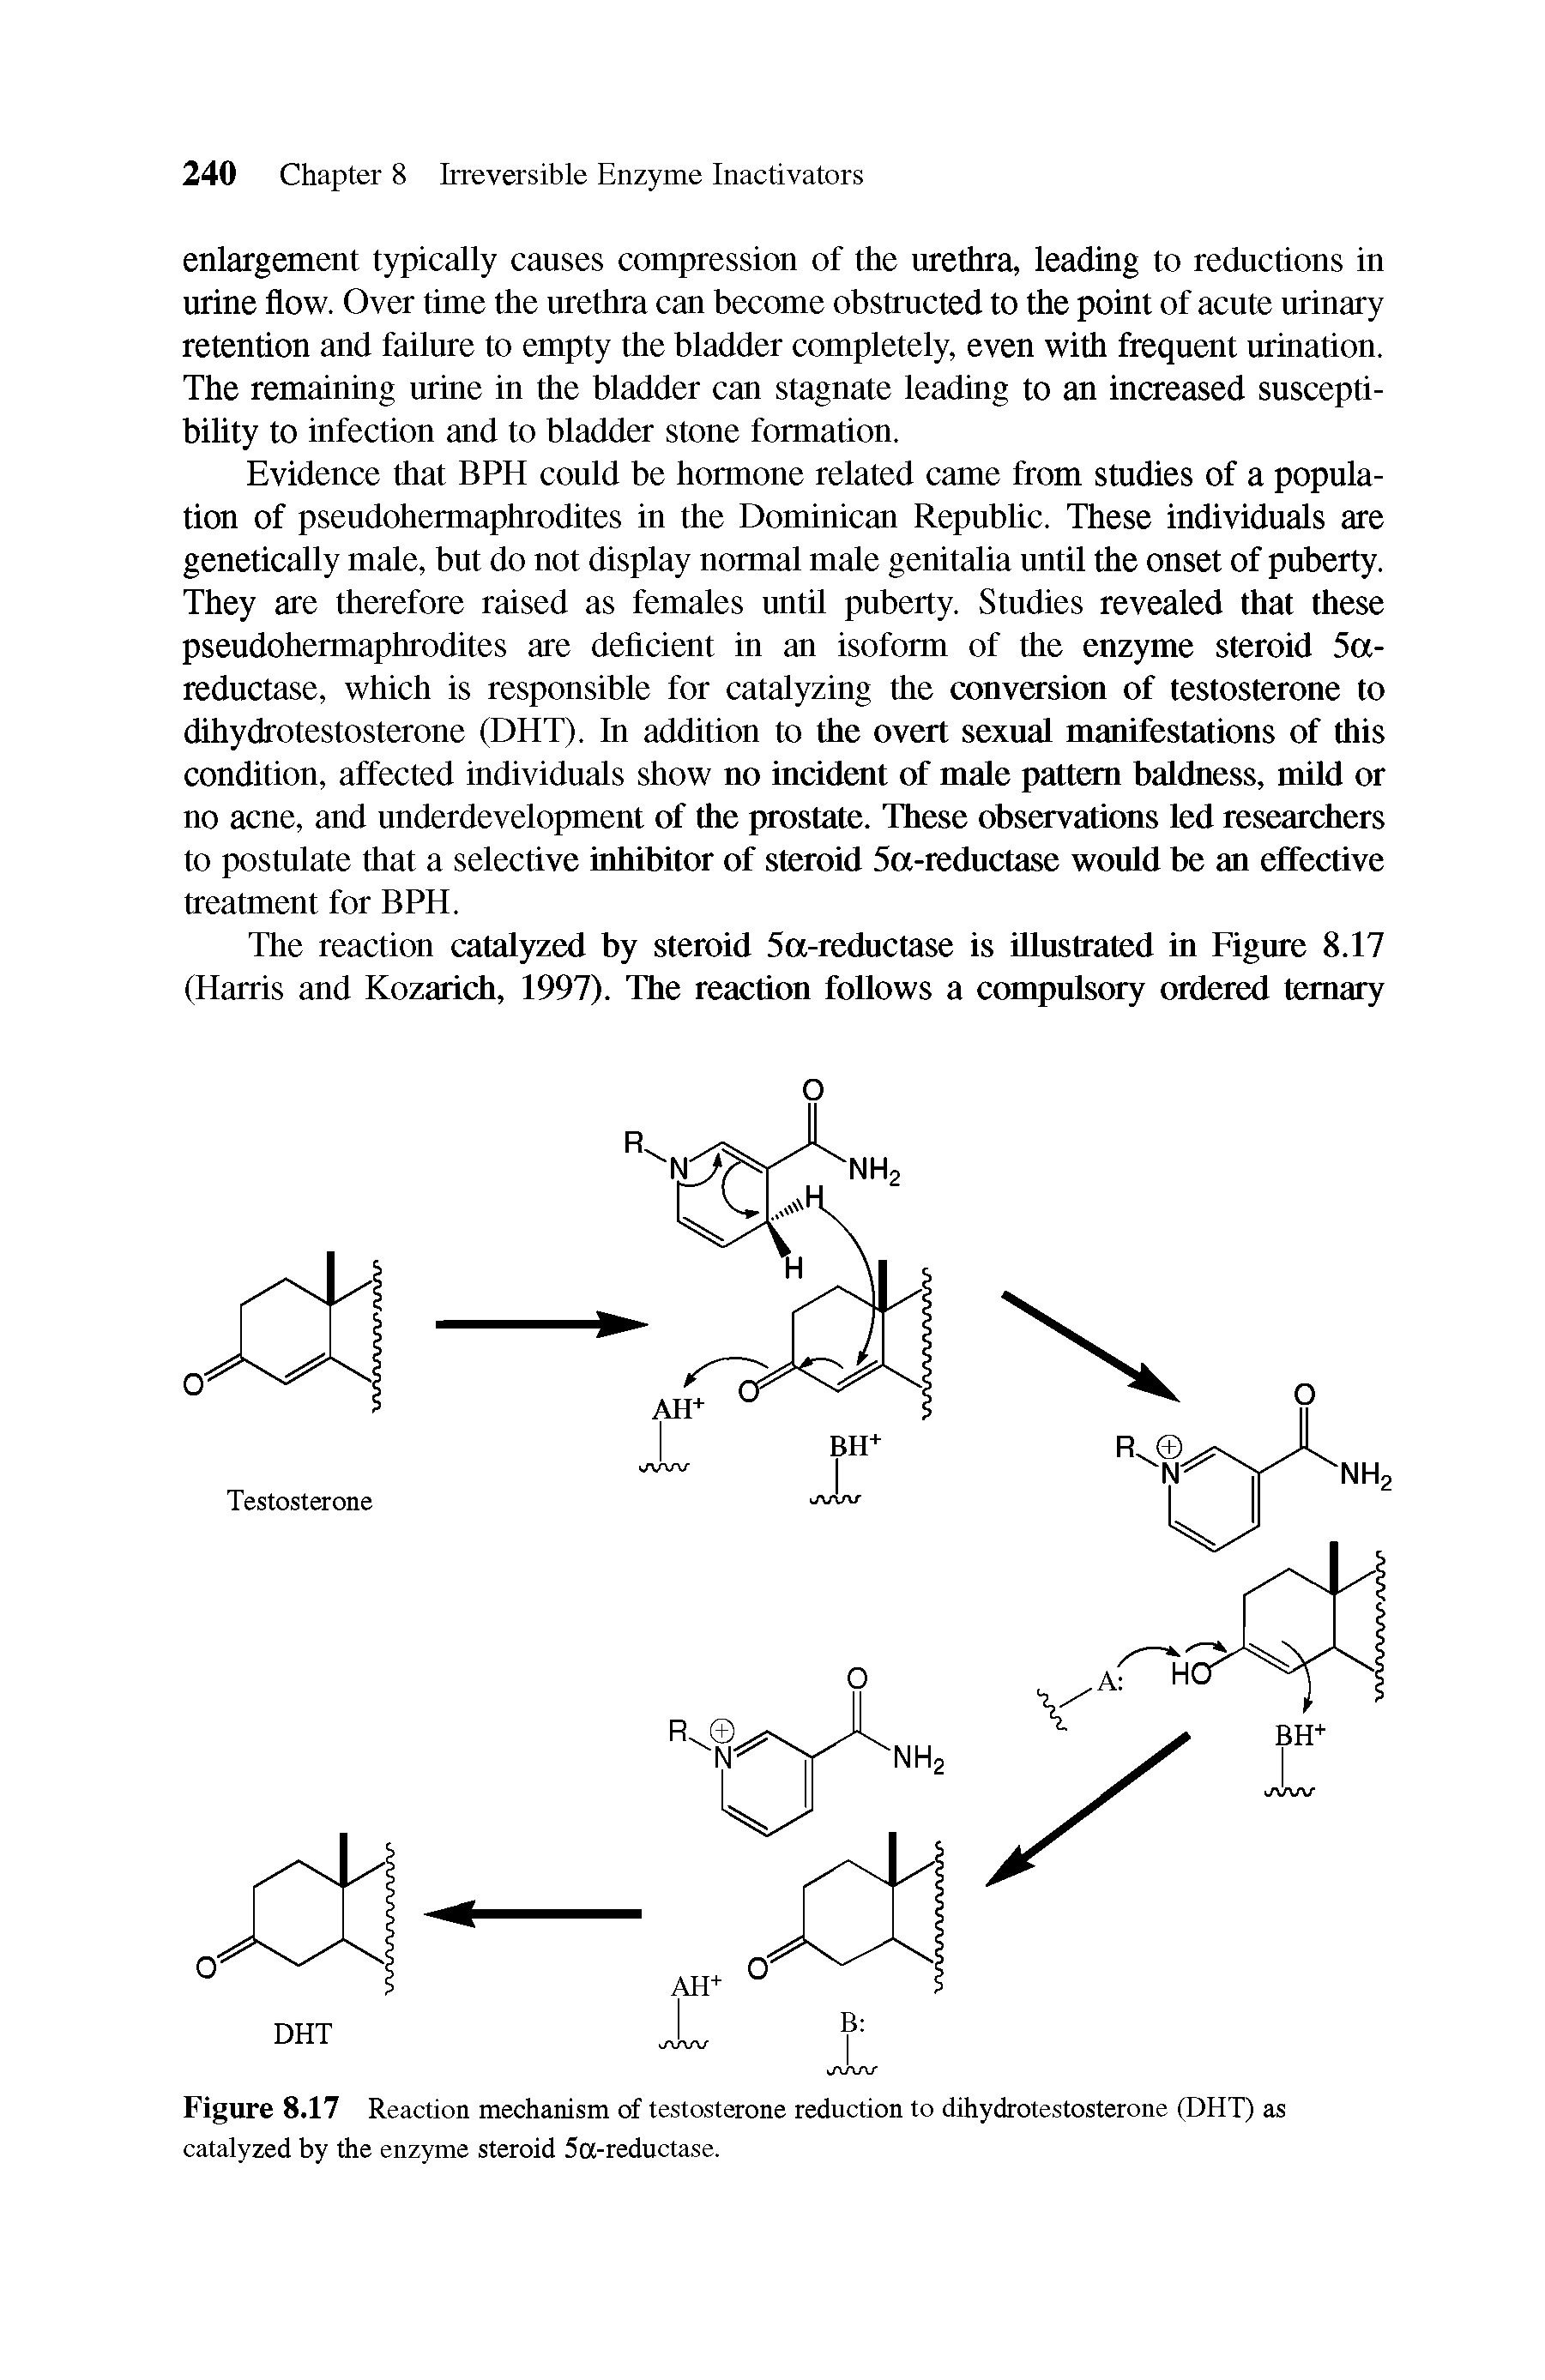 Figure 8.17 Reaction mechanism of testosterone reduction to dihydrotestosterone (DHT) as catalyzed by the enzyme steroid 5a-reductase.